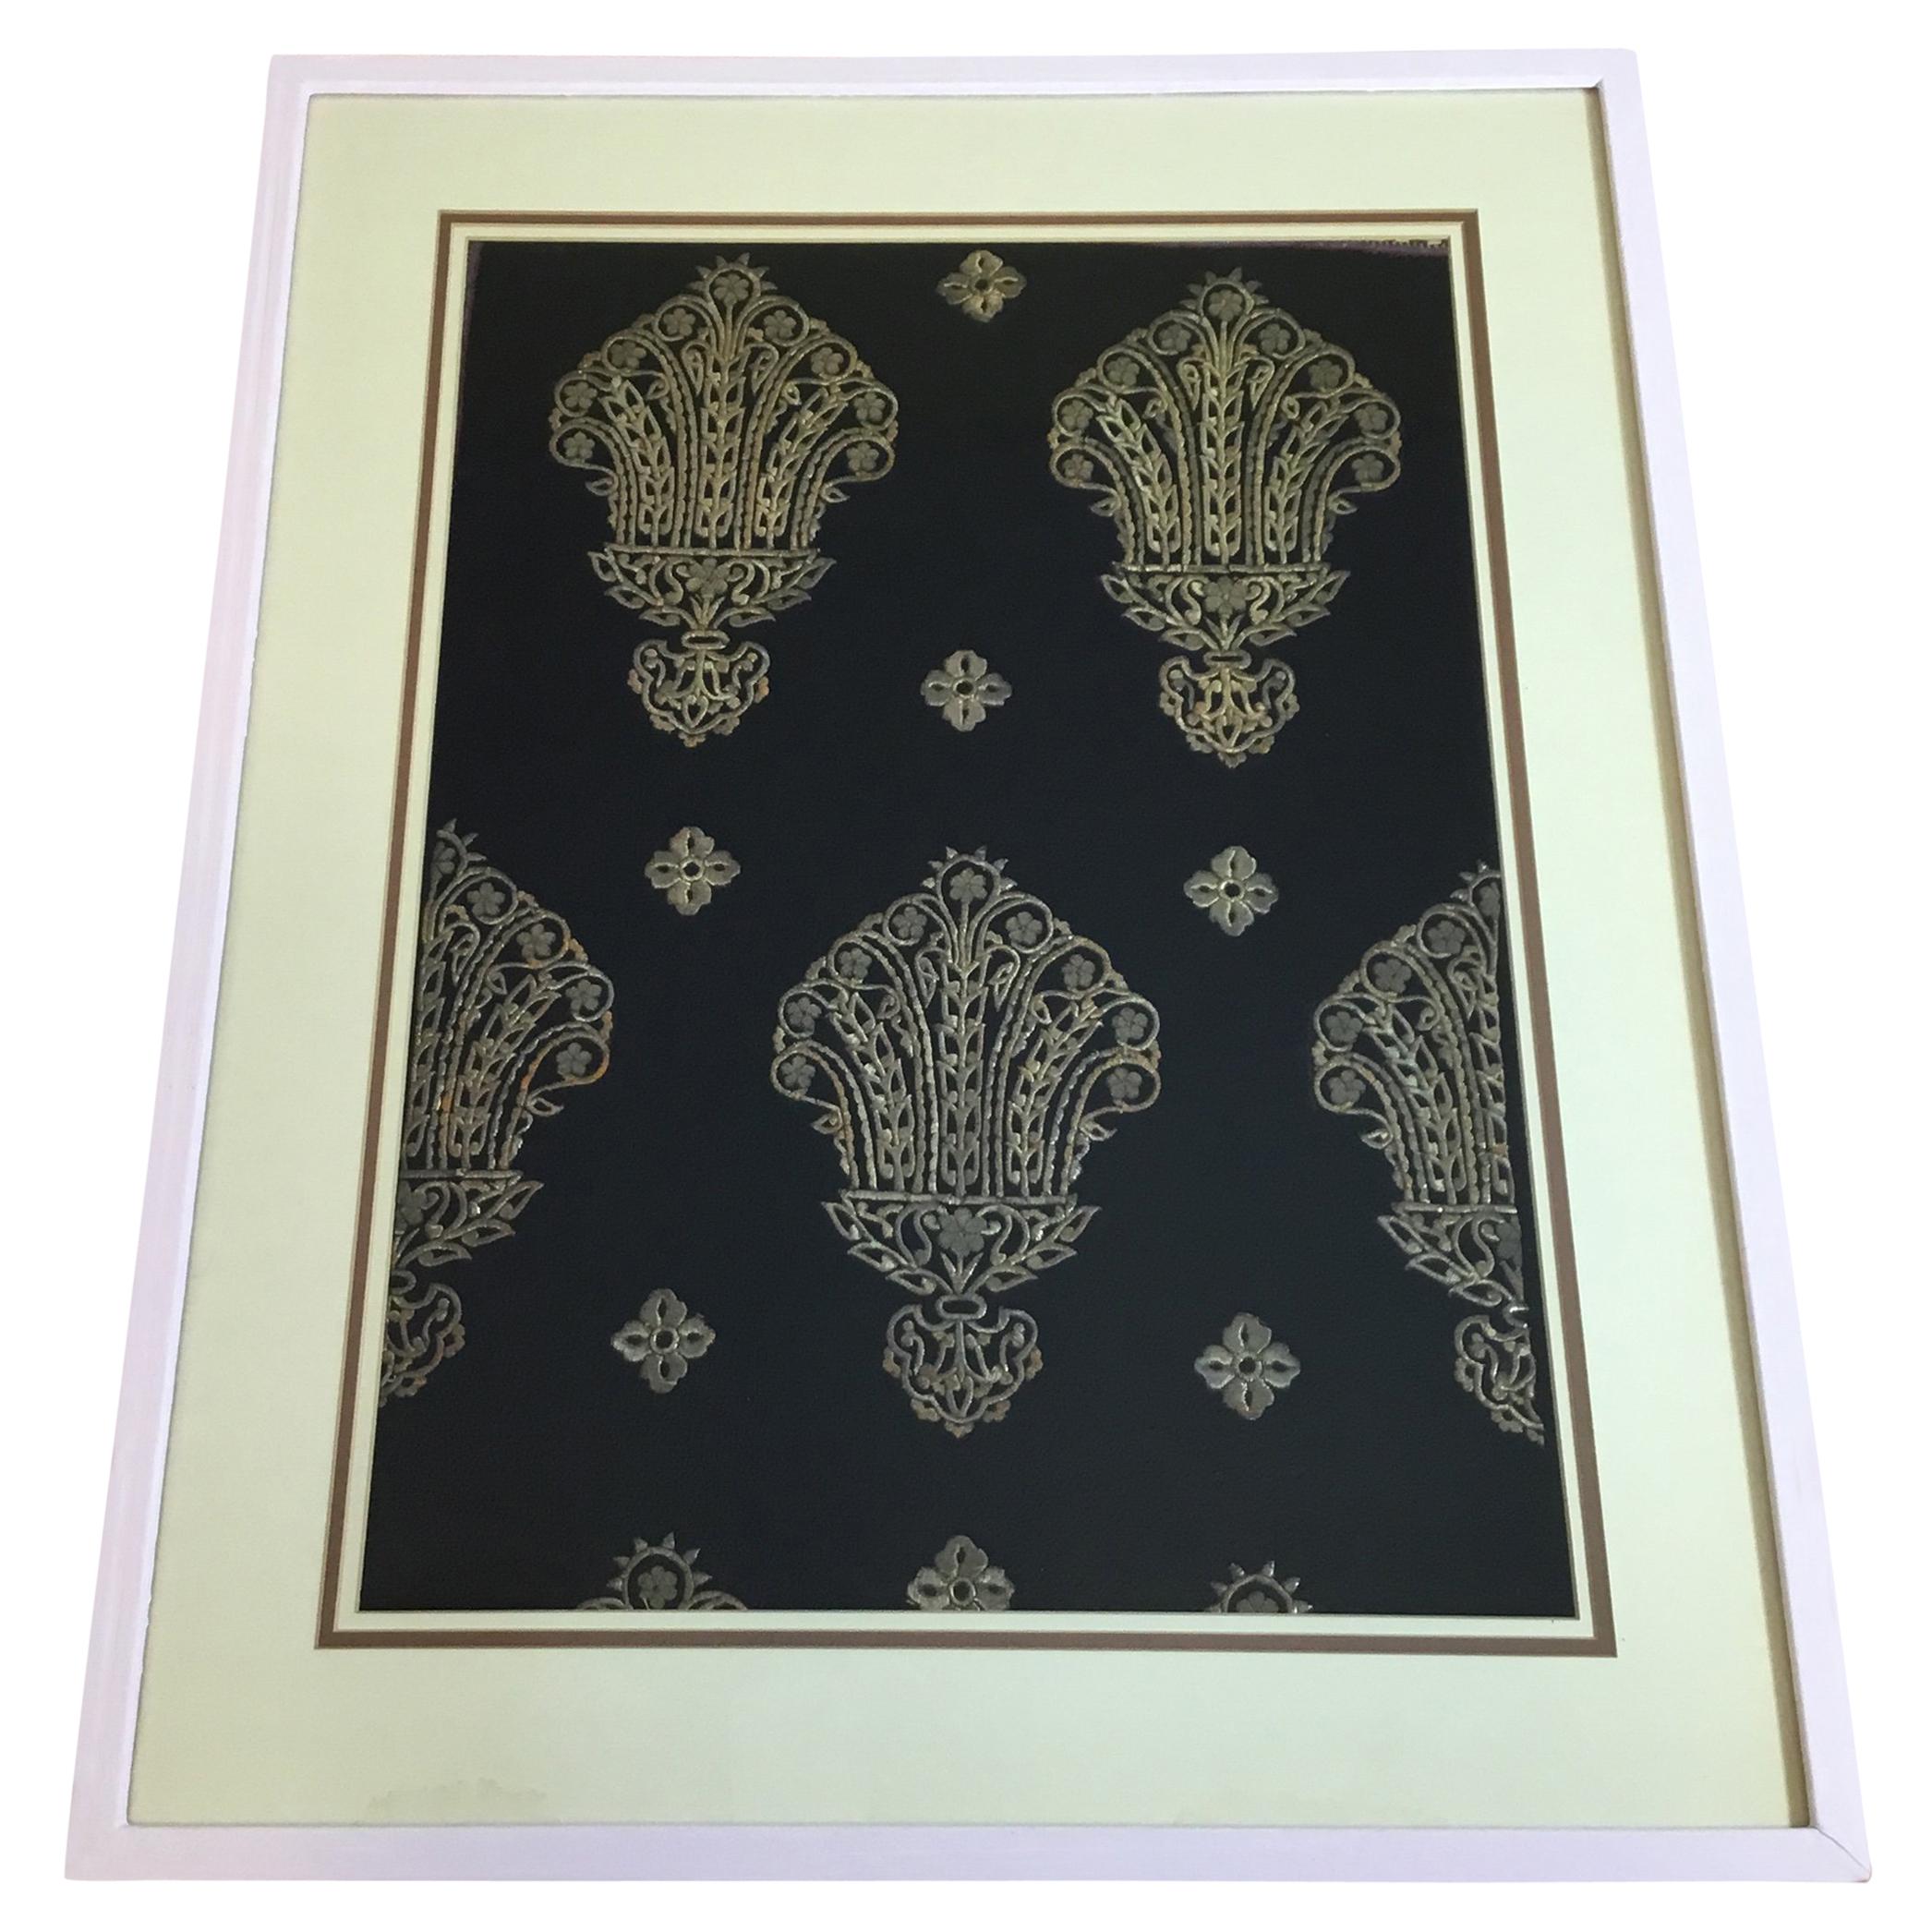 Turkish Hand Embroidery Textile in Shadowbox